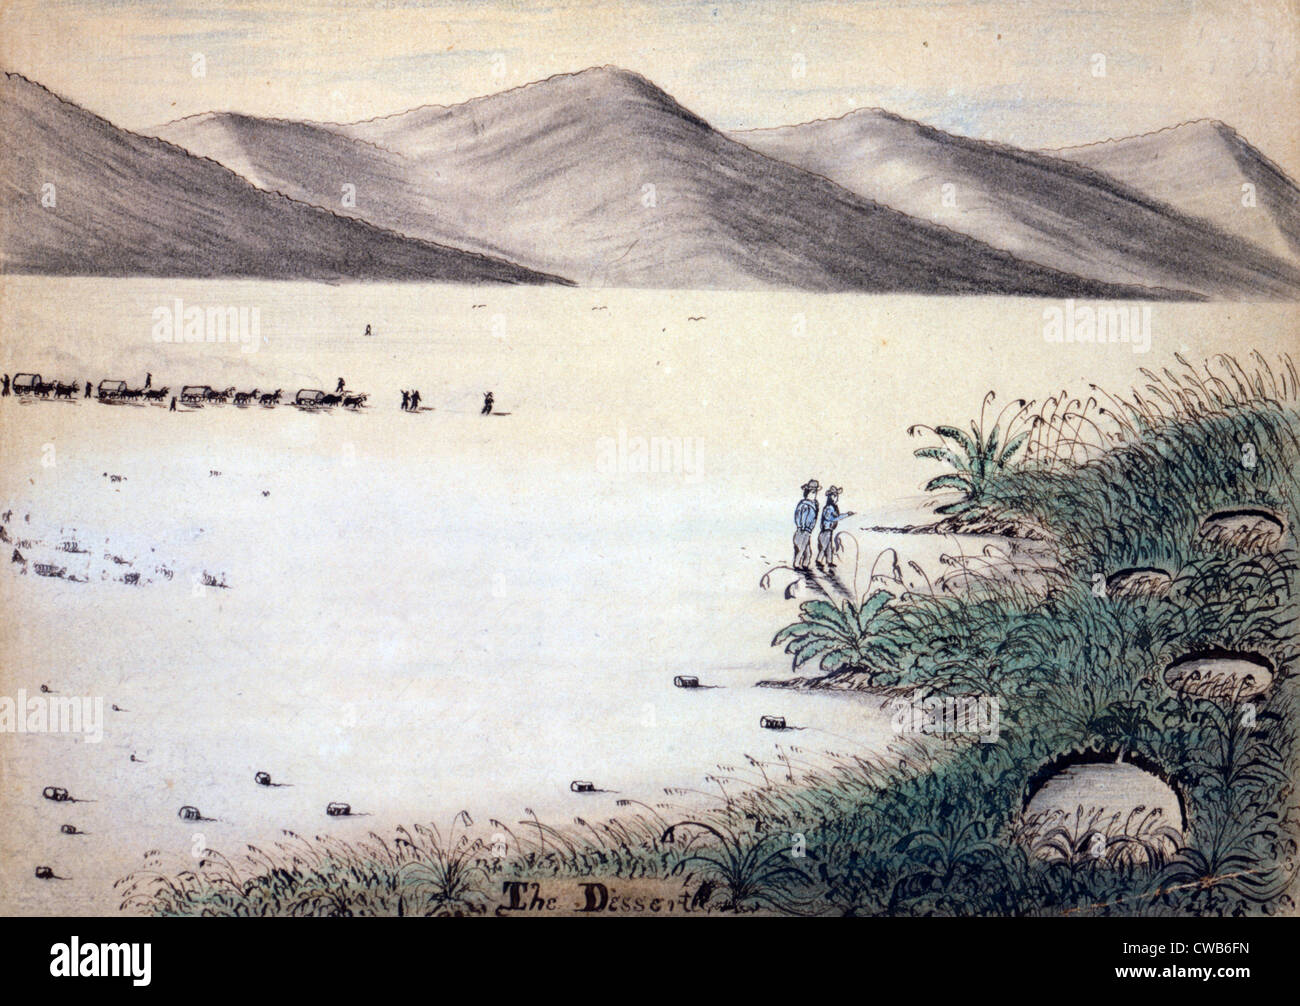 Wagon Train to the West. A wagon train of settlers crosses the Nevada desert. Daniel Jenks, color drawing, 1859 Stock Photo